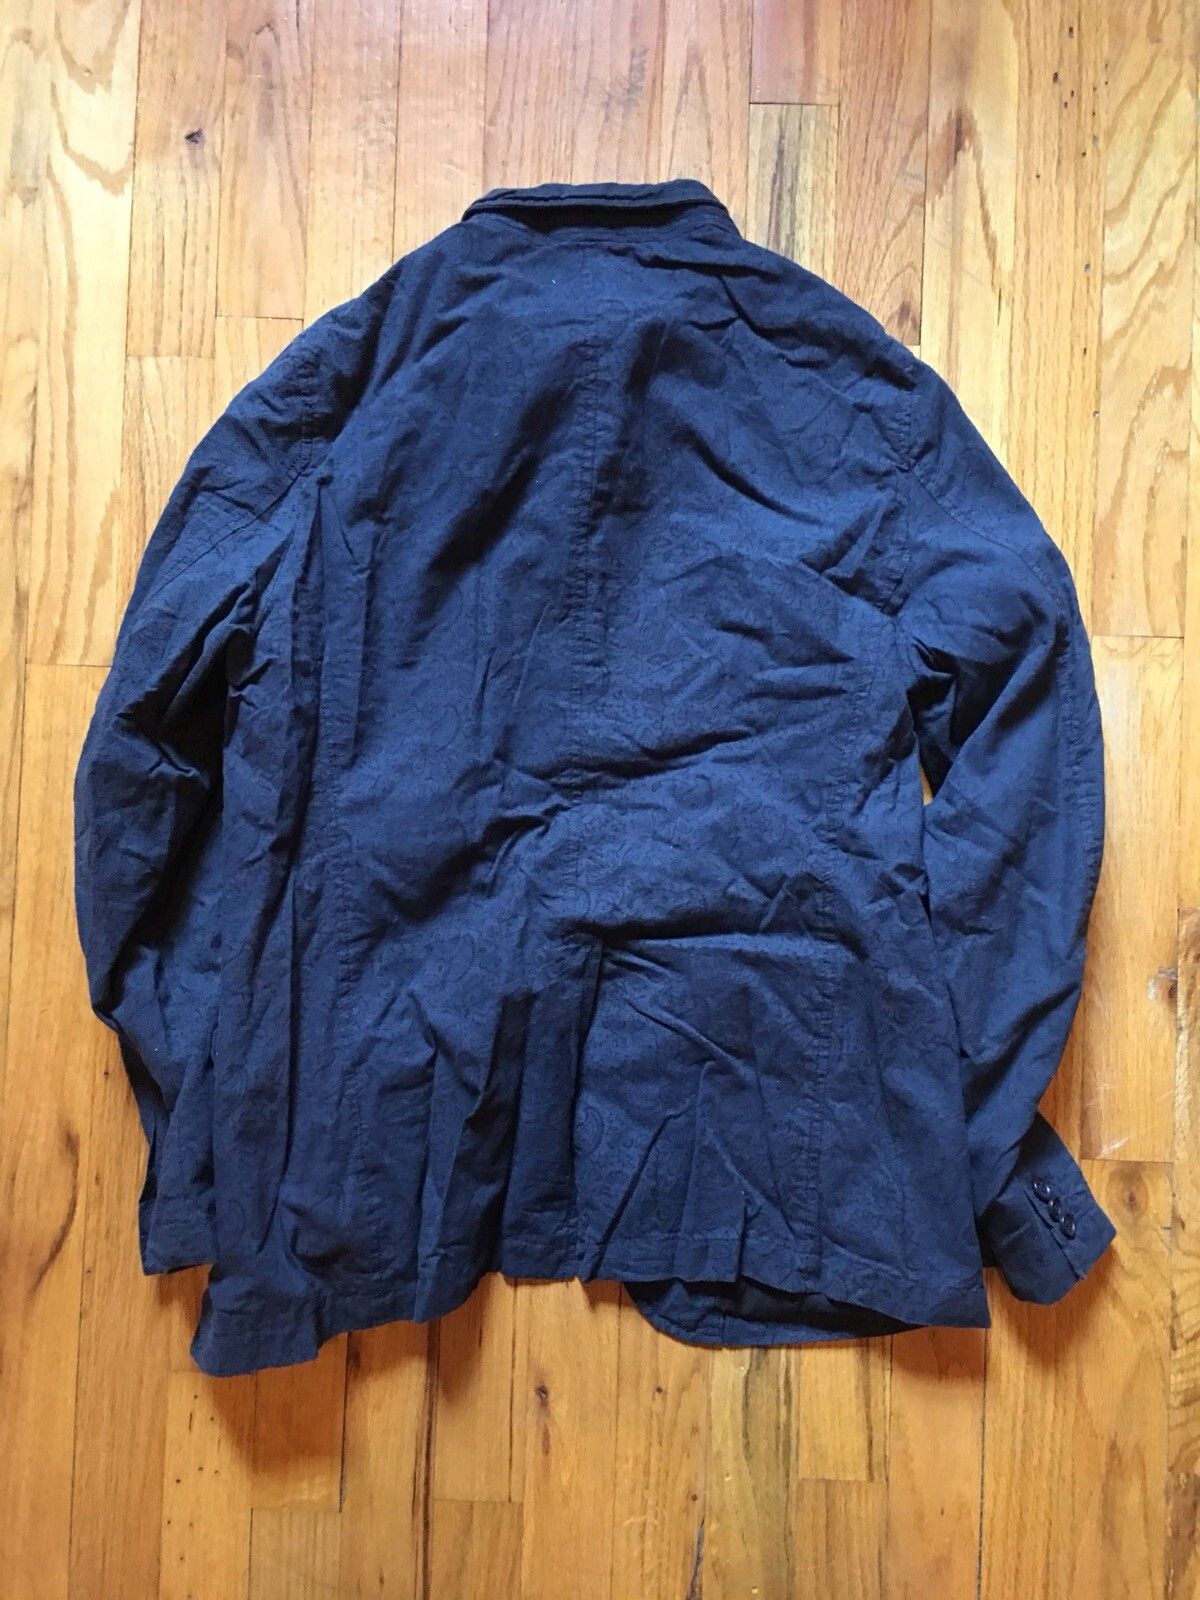 Engineered Garments Andover Jacket Size M Navy Paisley Size US M / EU 48-50 / 2 - 5 Preview